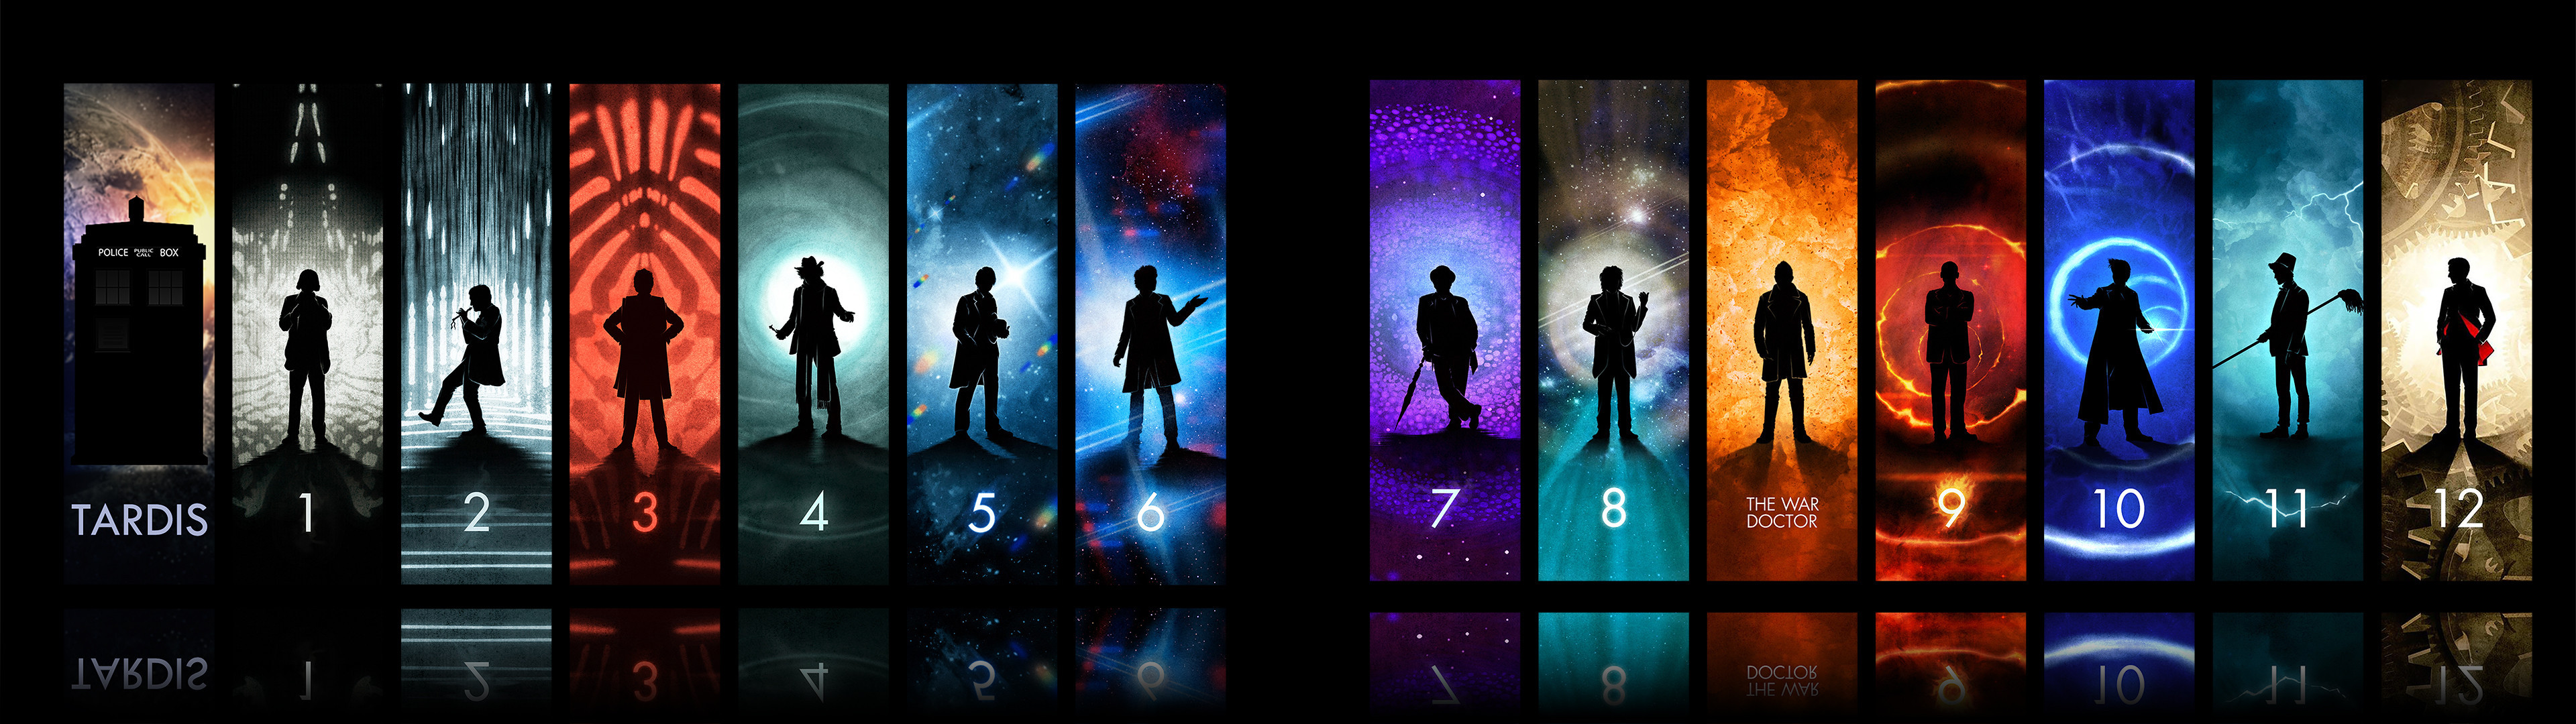 Doctor Who Background - HD Wallpaper 